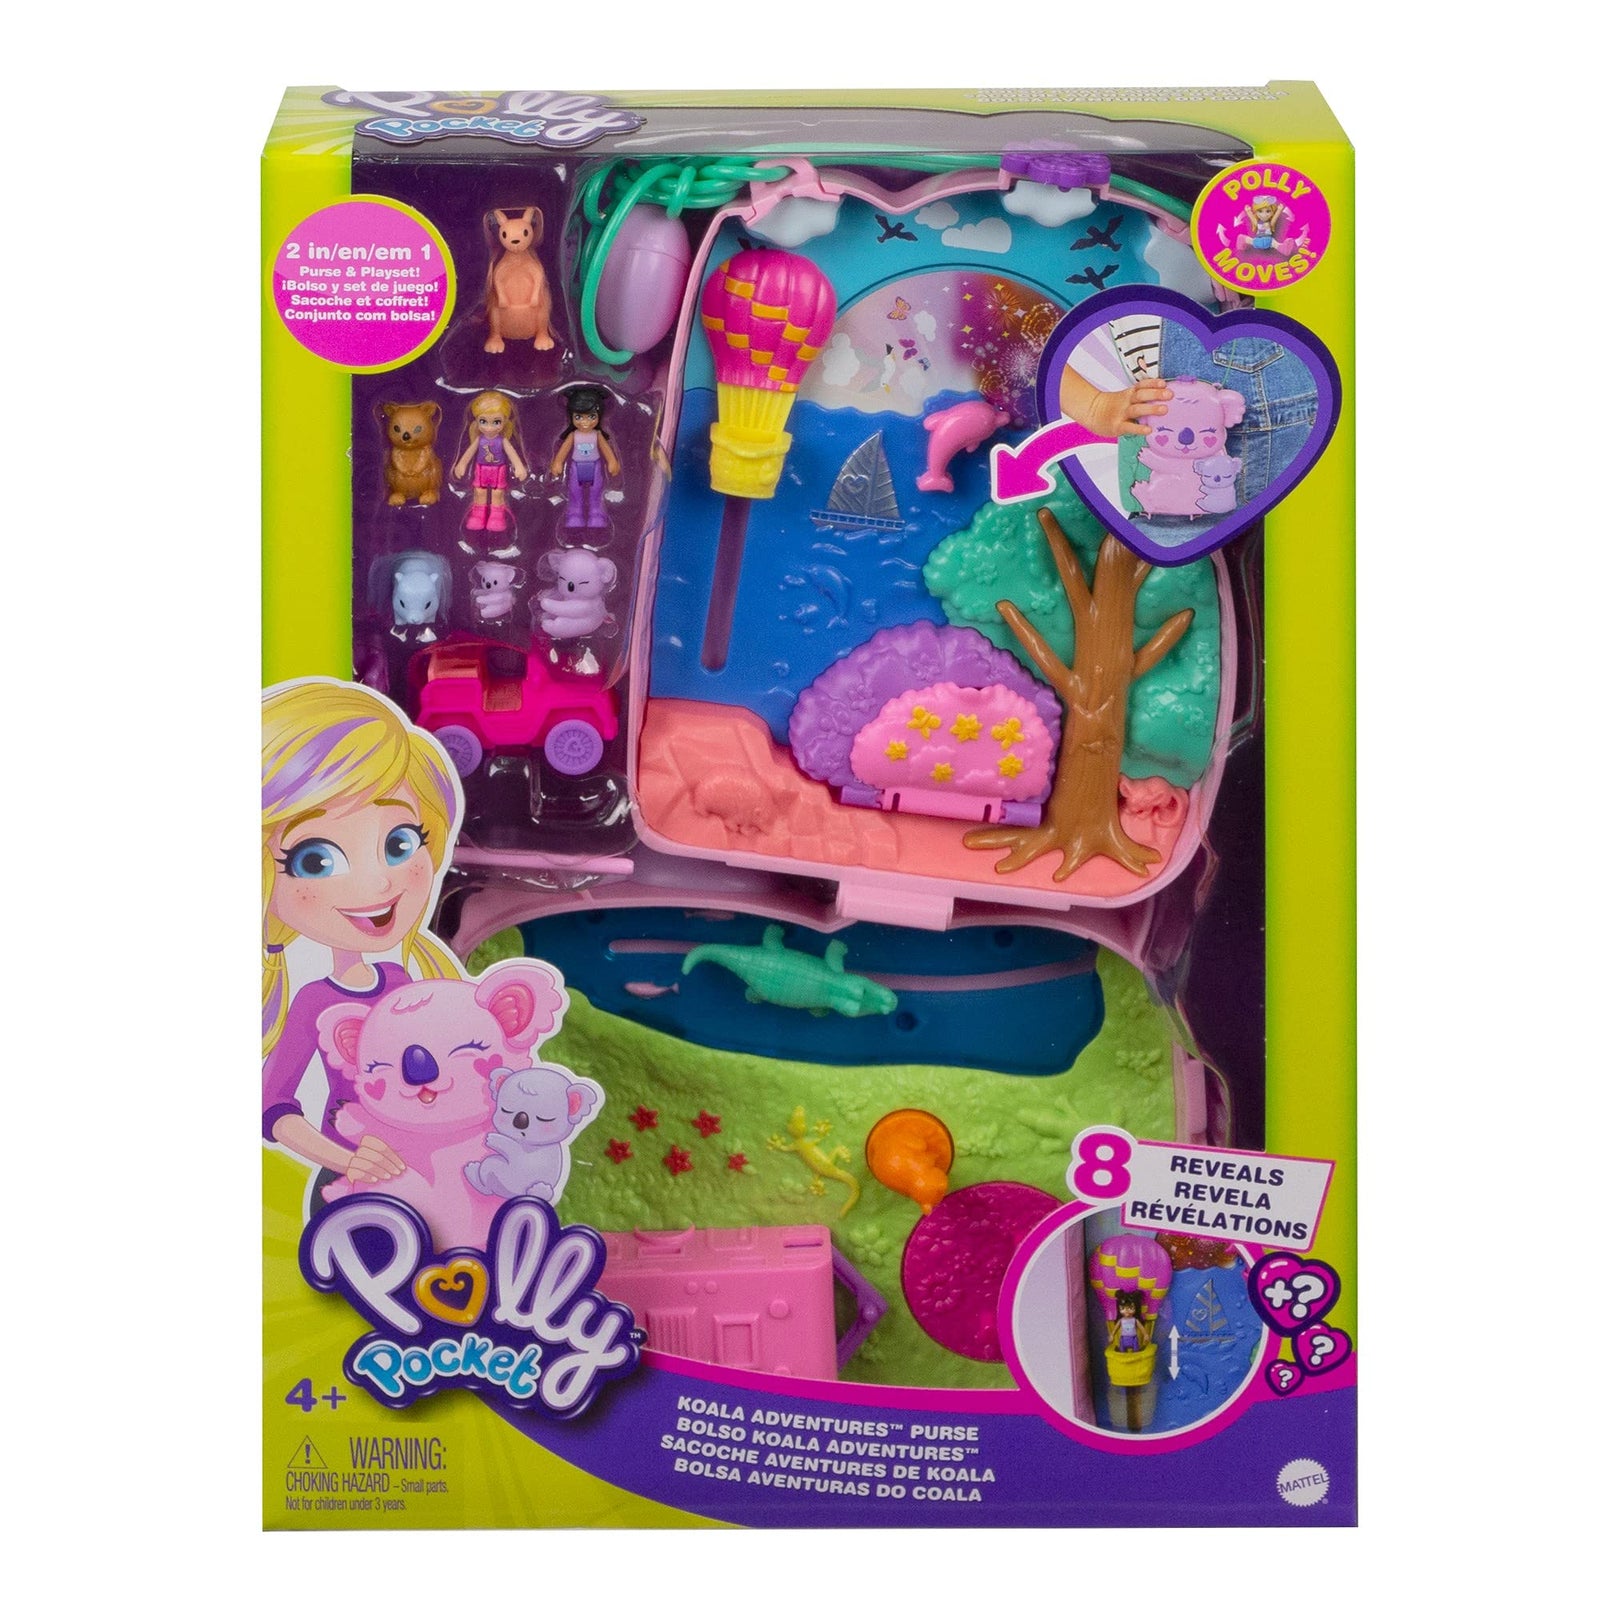 Polly Pocket Koala Adventures Wearable Purse Compact with Micro Polly Doll & Friend Doll, 8 Outdoor-Related Features, 5 Animals & Removable Vehicle Accessory, Great Gift for Ages 4 Years Old & Up